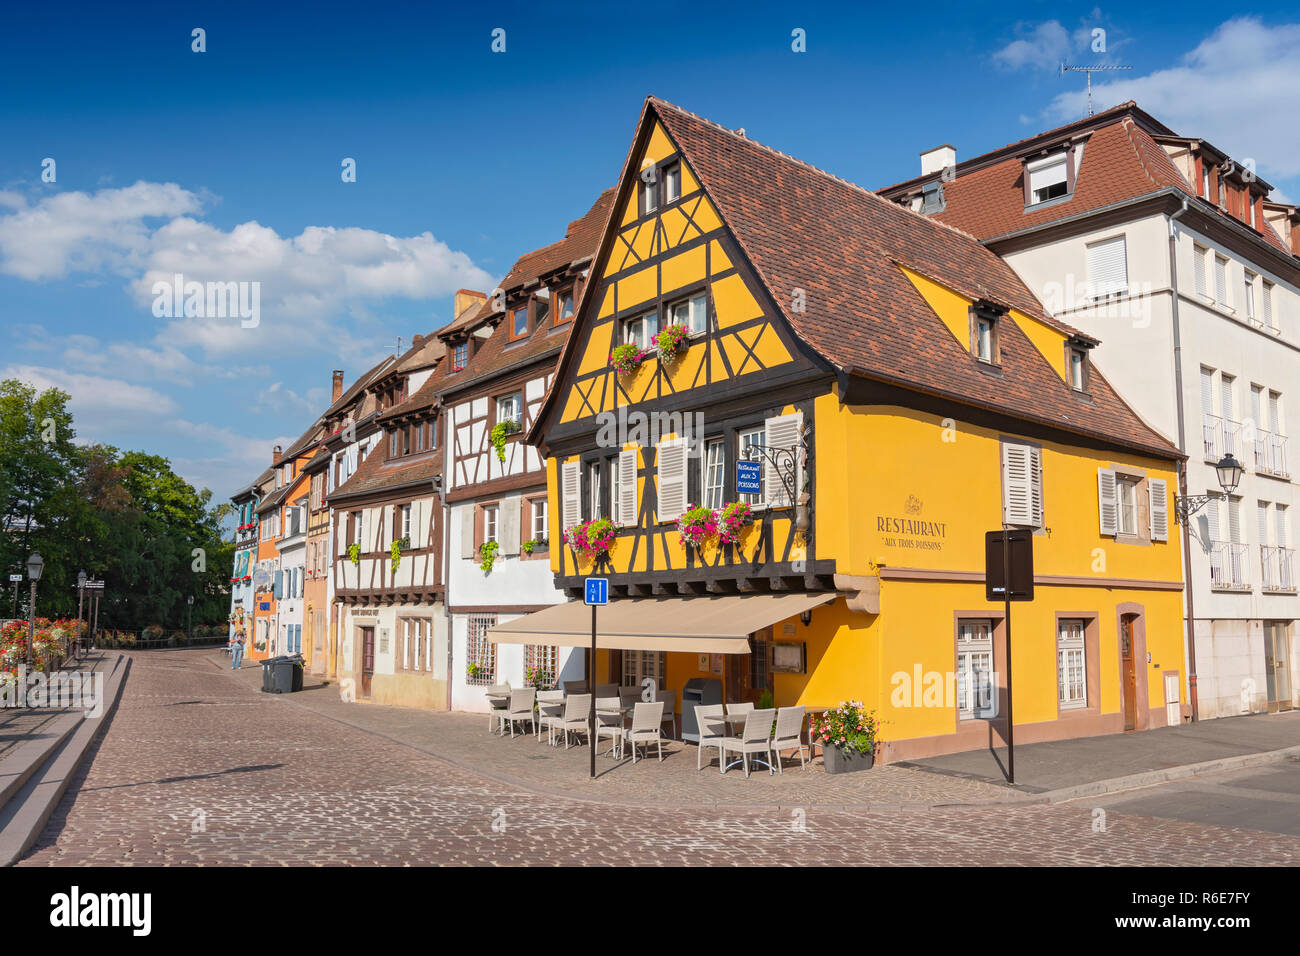 Restaurant Aux Trios Poissons Colorful Traditional French House In Petite Venise, Colmar, France Stock Photo